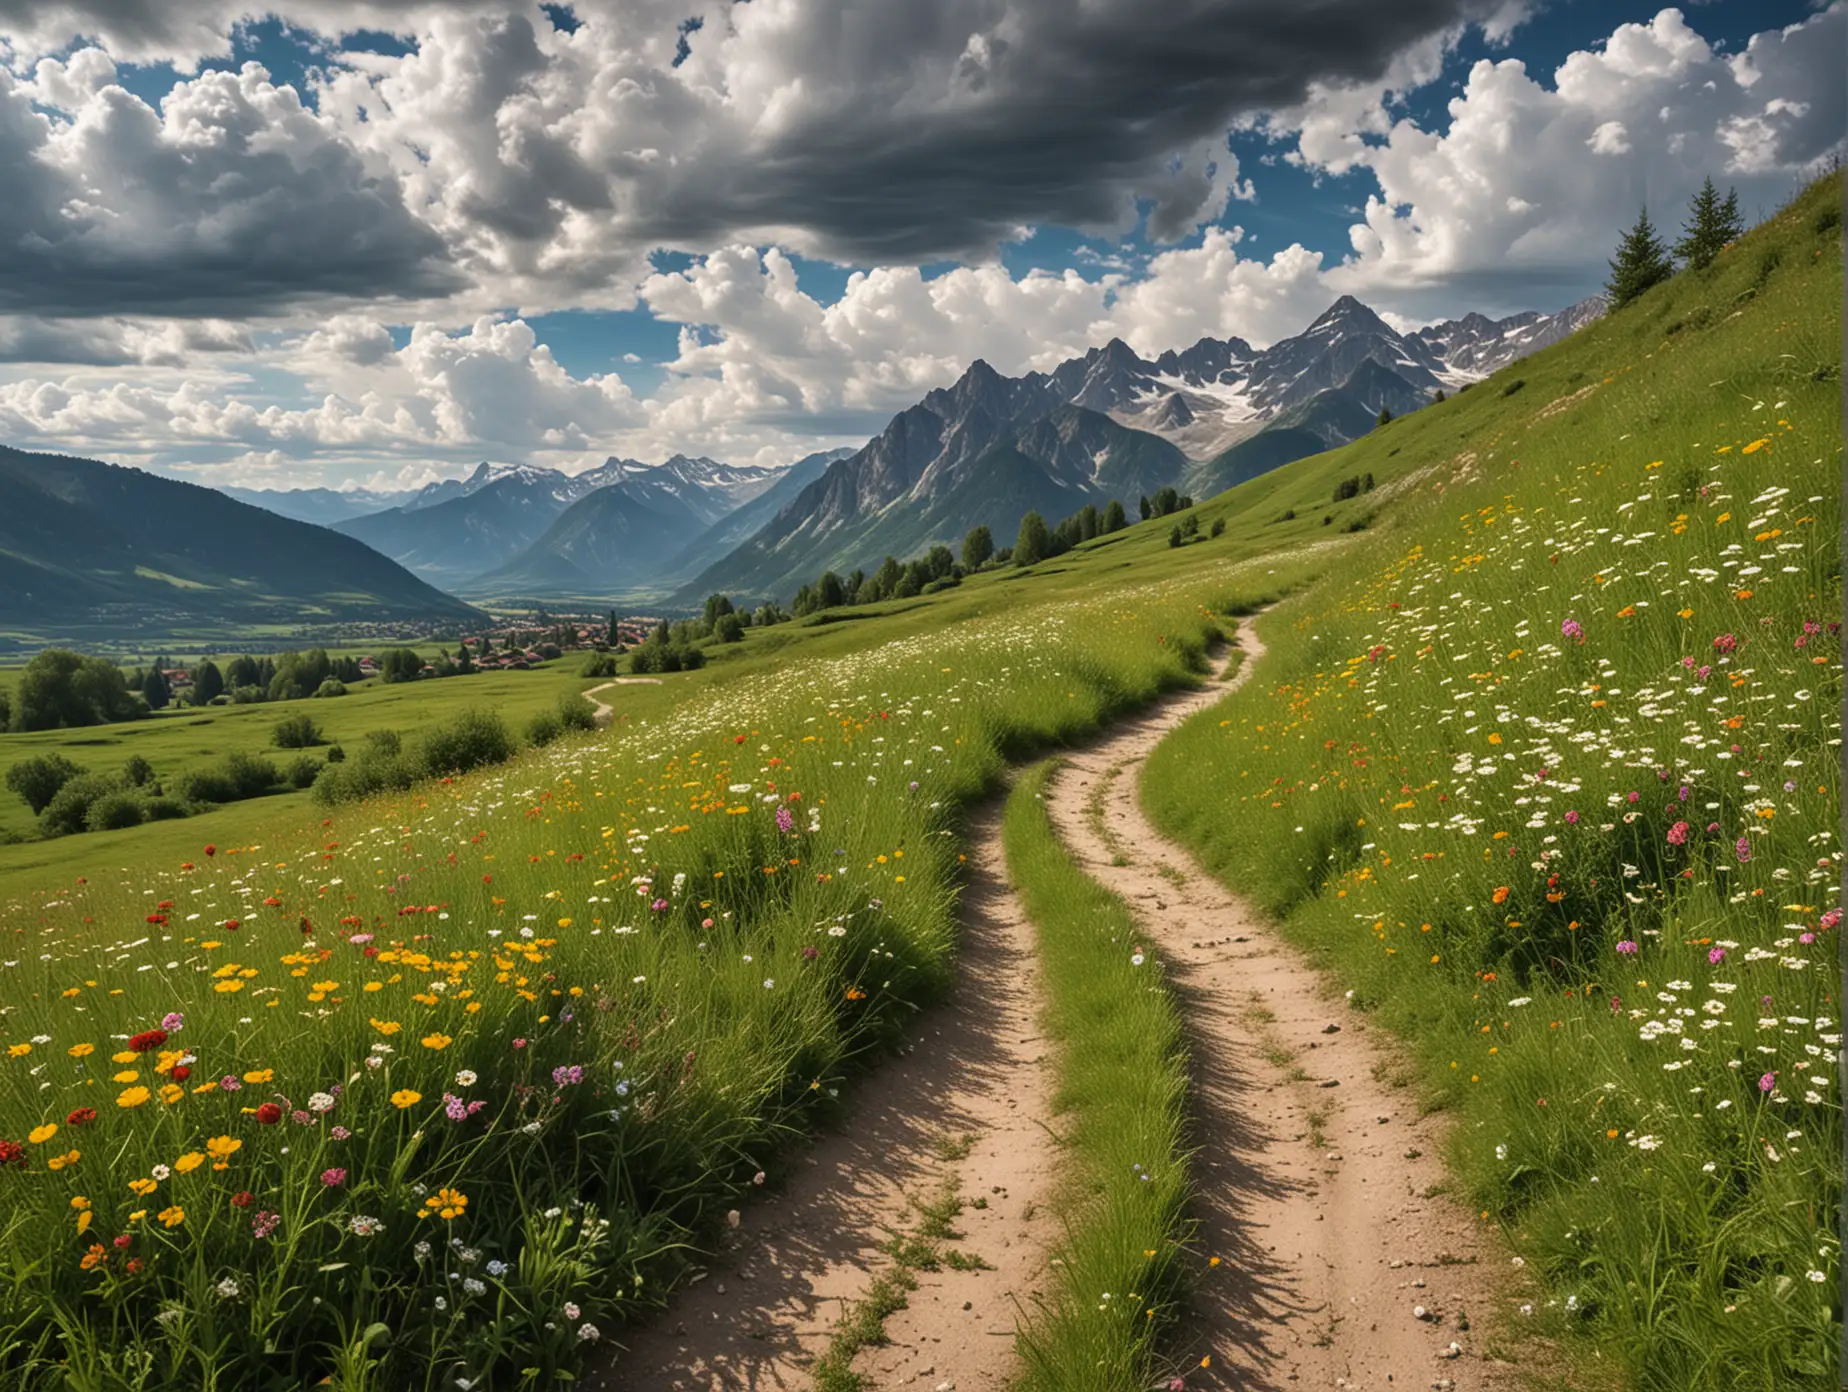 On a meadow there is a small path, the sides of the road are full of flowers, in the distance there are mountains, clouds, feeling relaxed